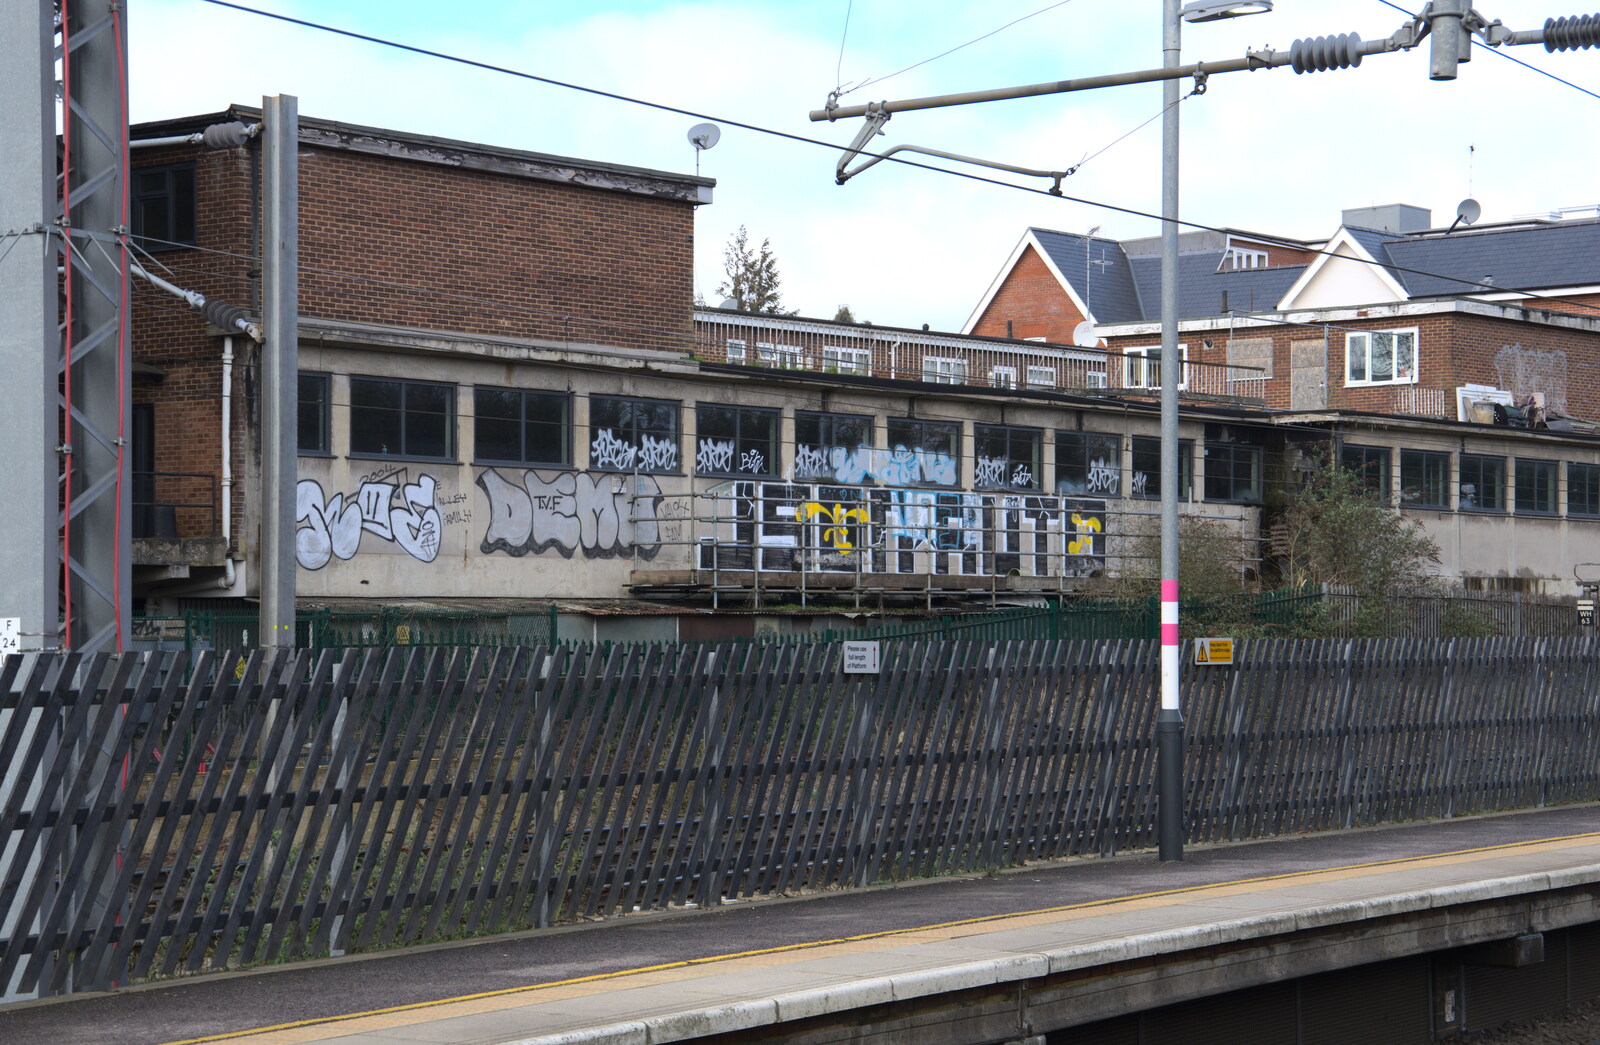 Graffiti at Radlett station from HMS Belfast and the South Bank, Southwark, London - 17th February 2020